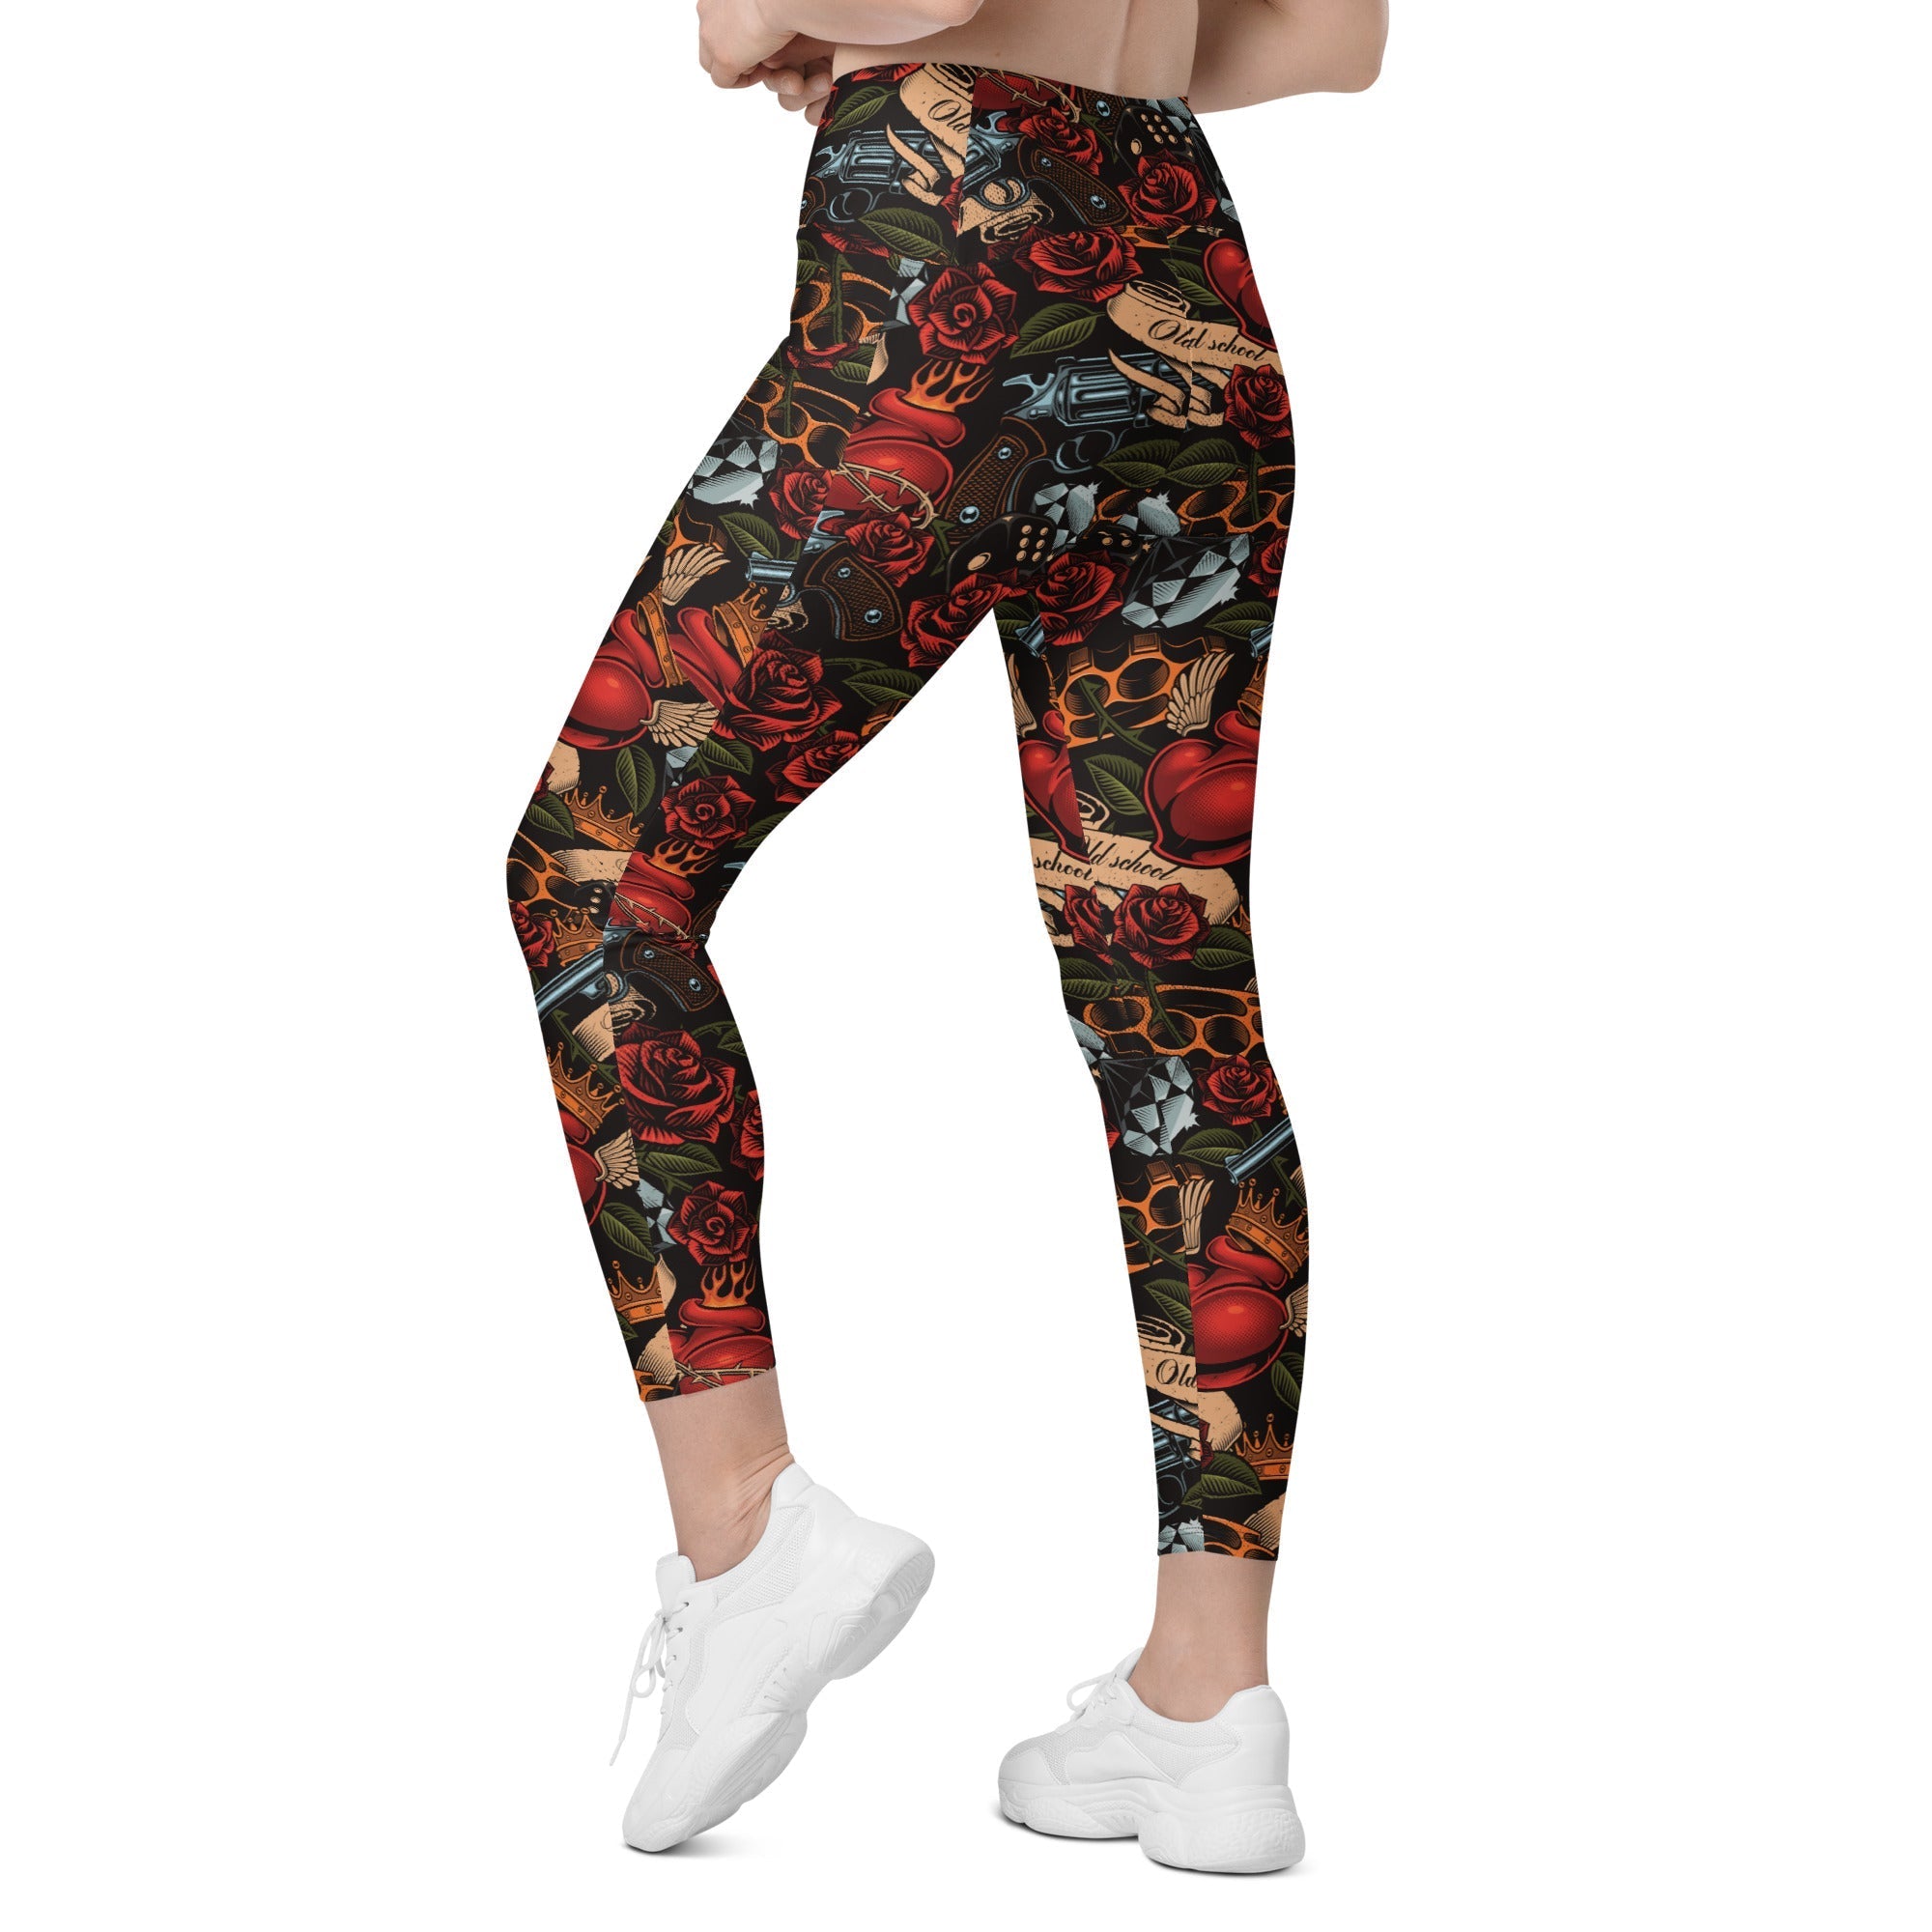 Vintage Tattoos Crossover Leggings With Pockets